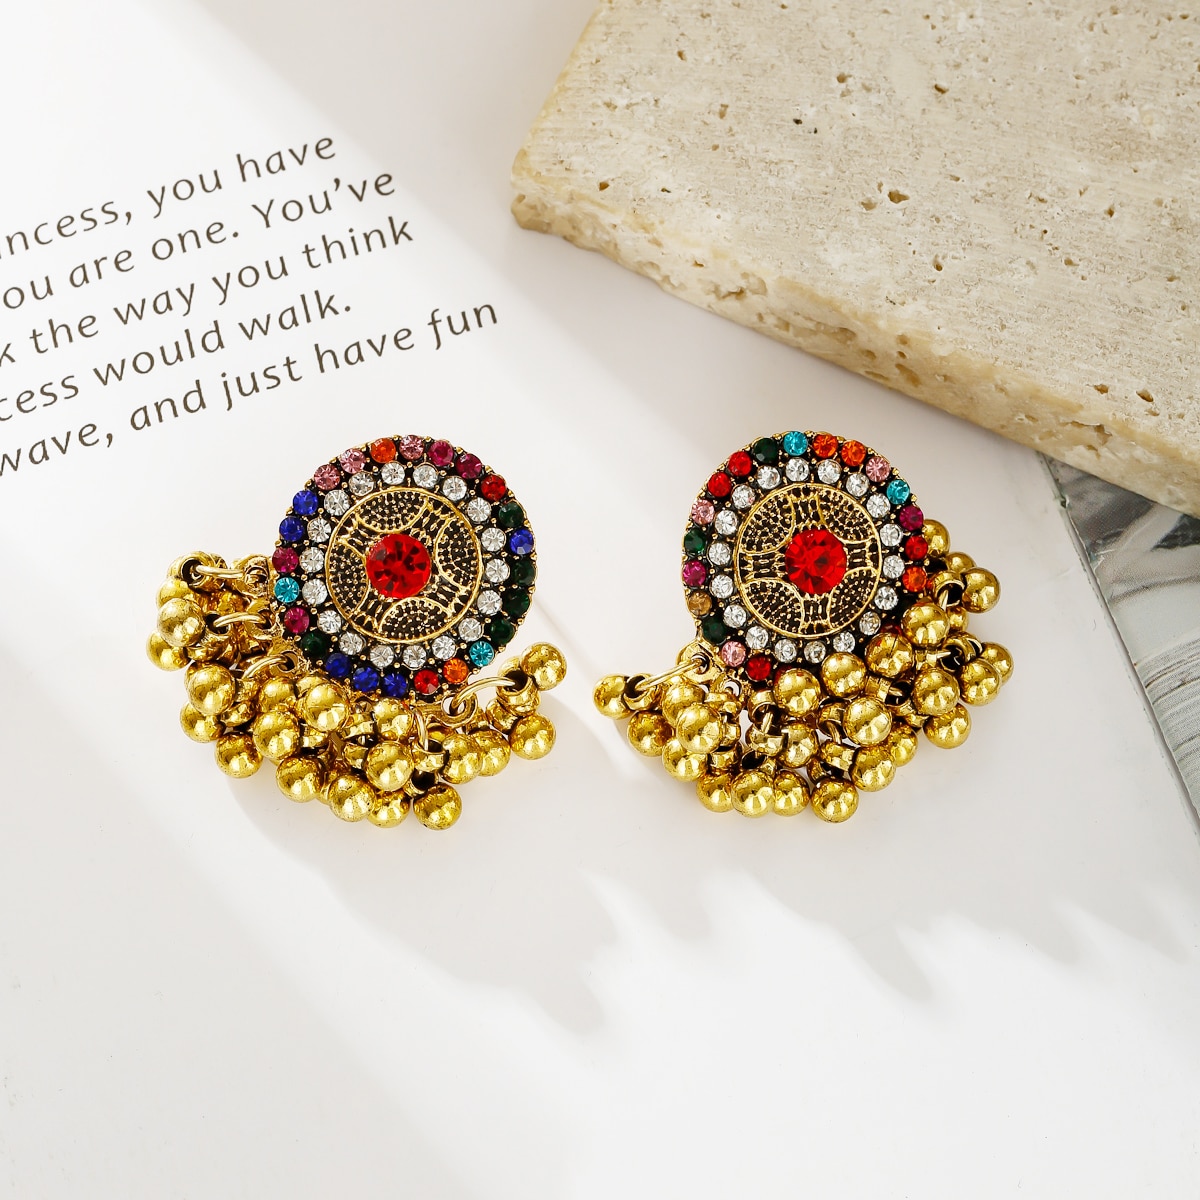 Classic-Ethnic-CZ-Indian-Earrings-For-Women-Gypsy-Round-Alloy-Jhumka-Earring-Fashion-Jewelry-Orecchi-1005004770706519-4